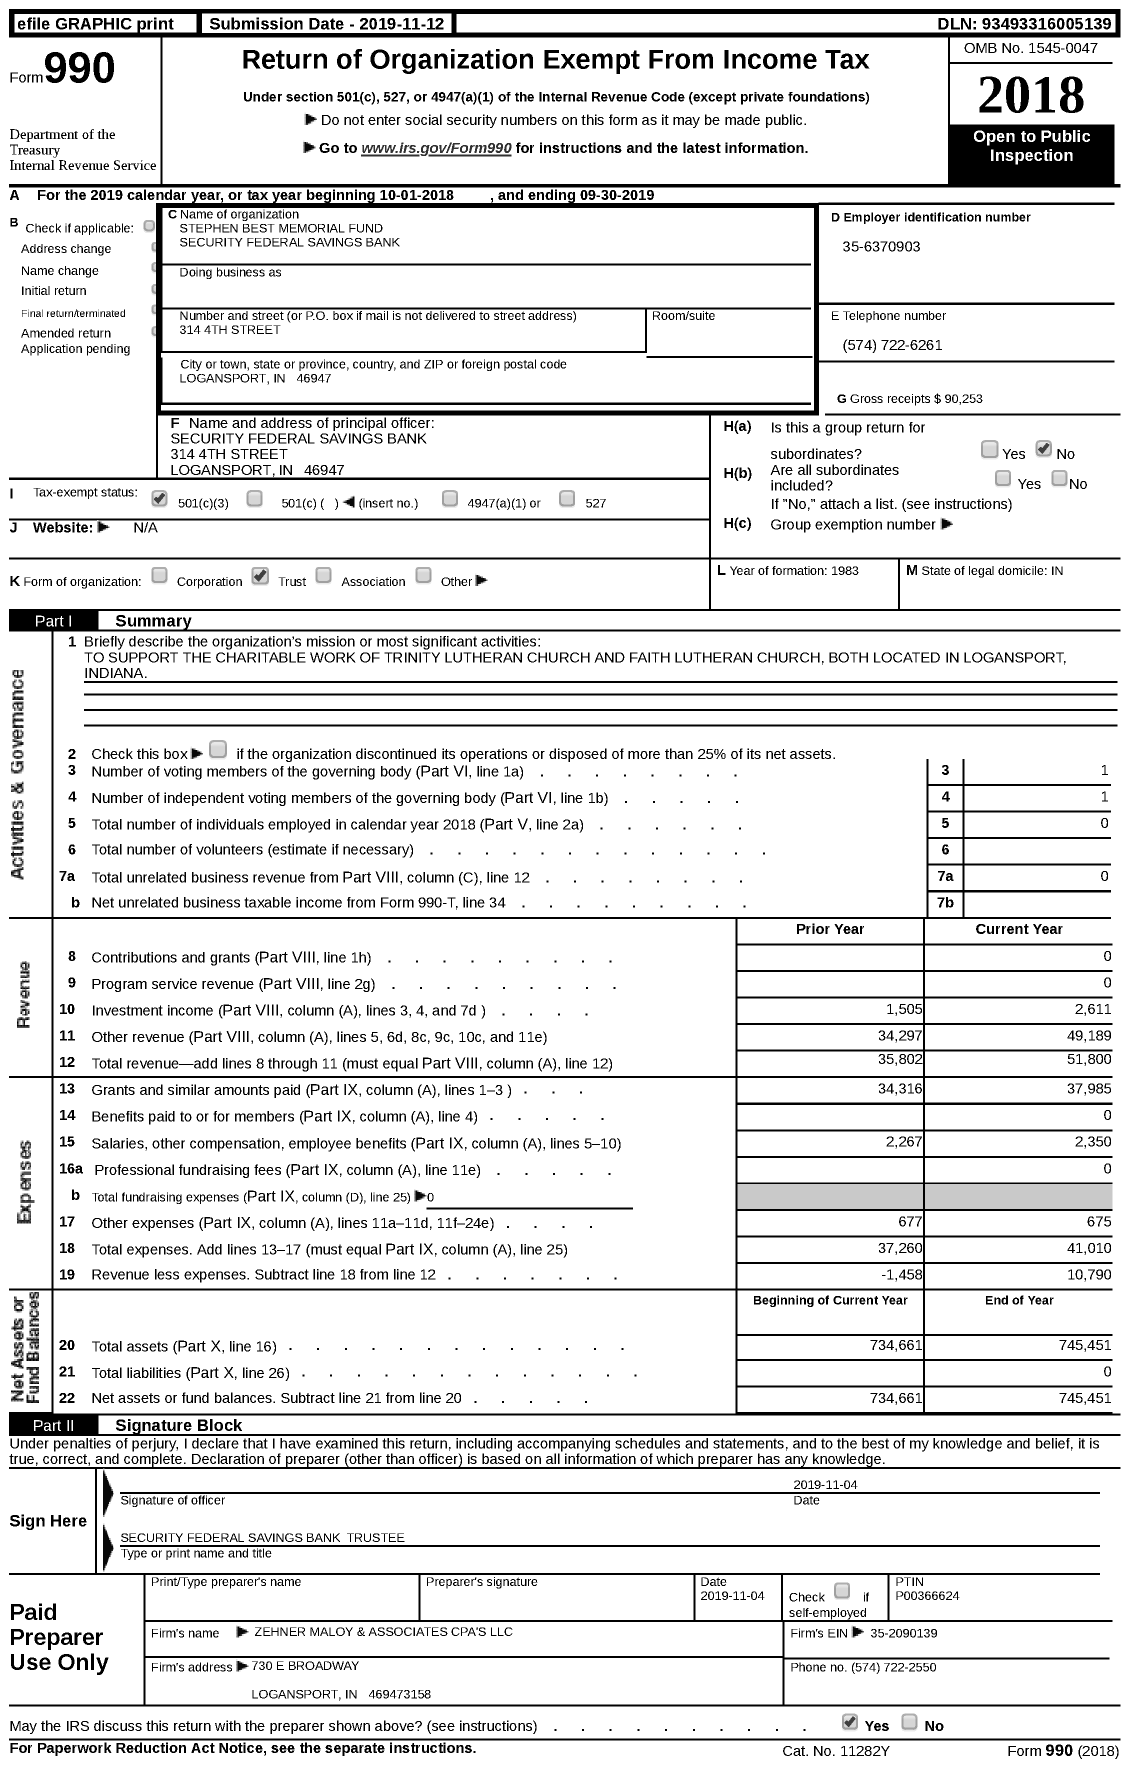 Image of first page of 2018 Form 990 for Stephen Best Memorial Fund Security Federal Savings Bank